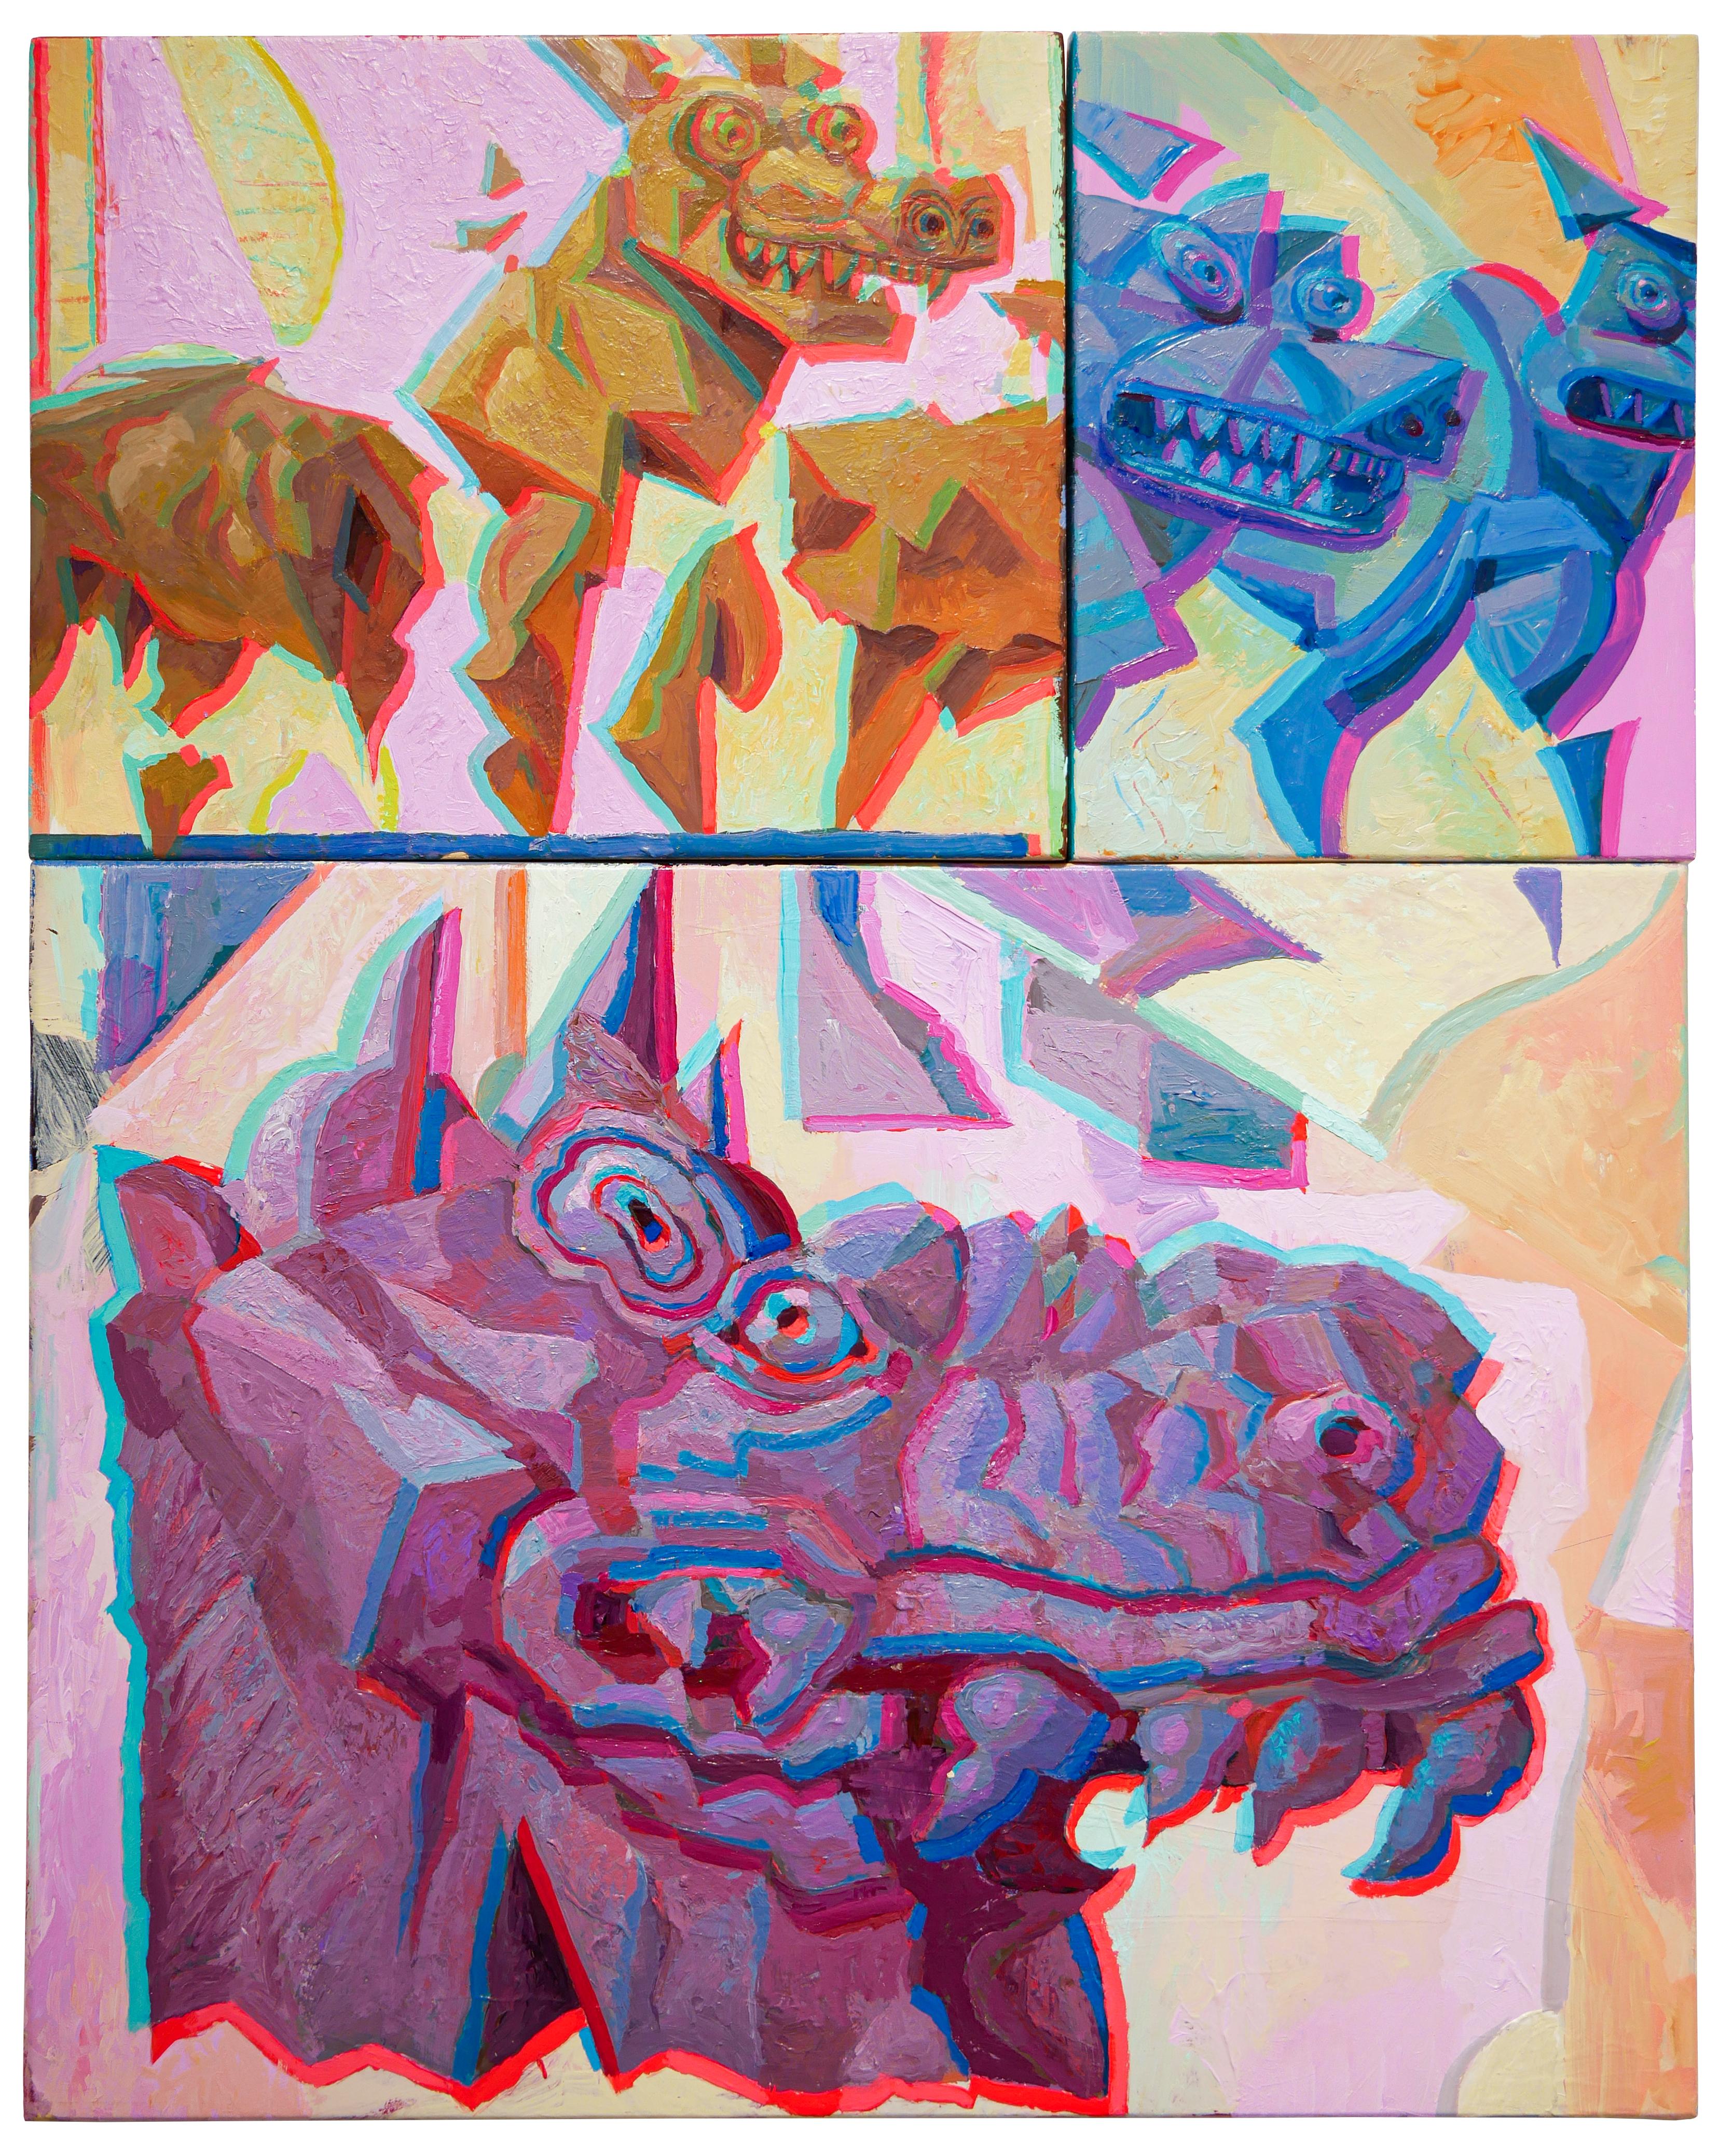 "Copy of a Copy of a Fake" Purple, Neon Pink, and White Anaglyph Painting